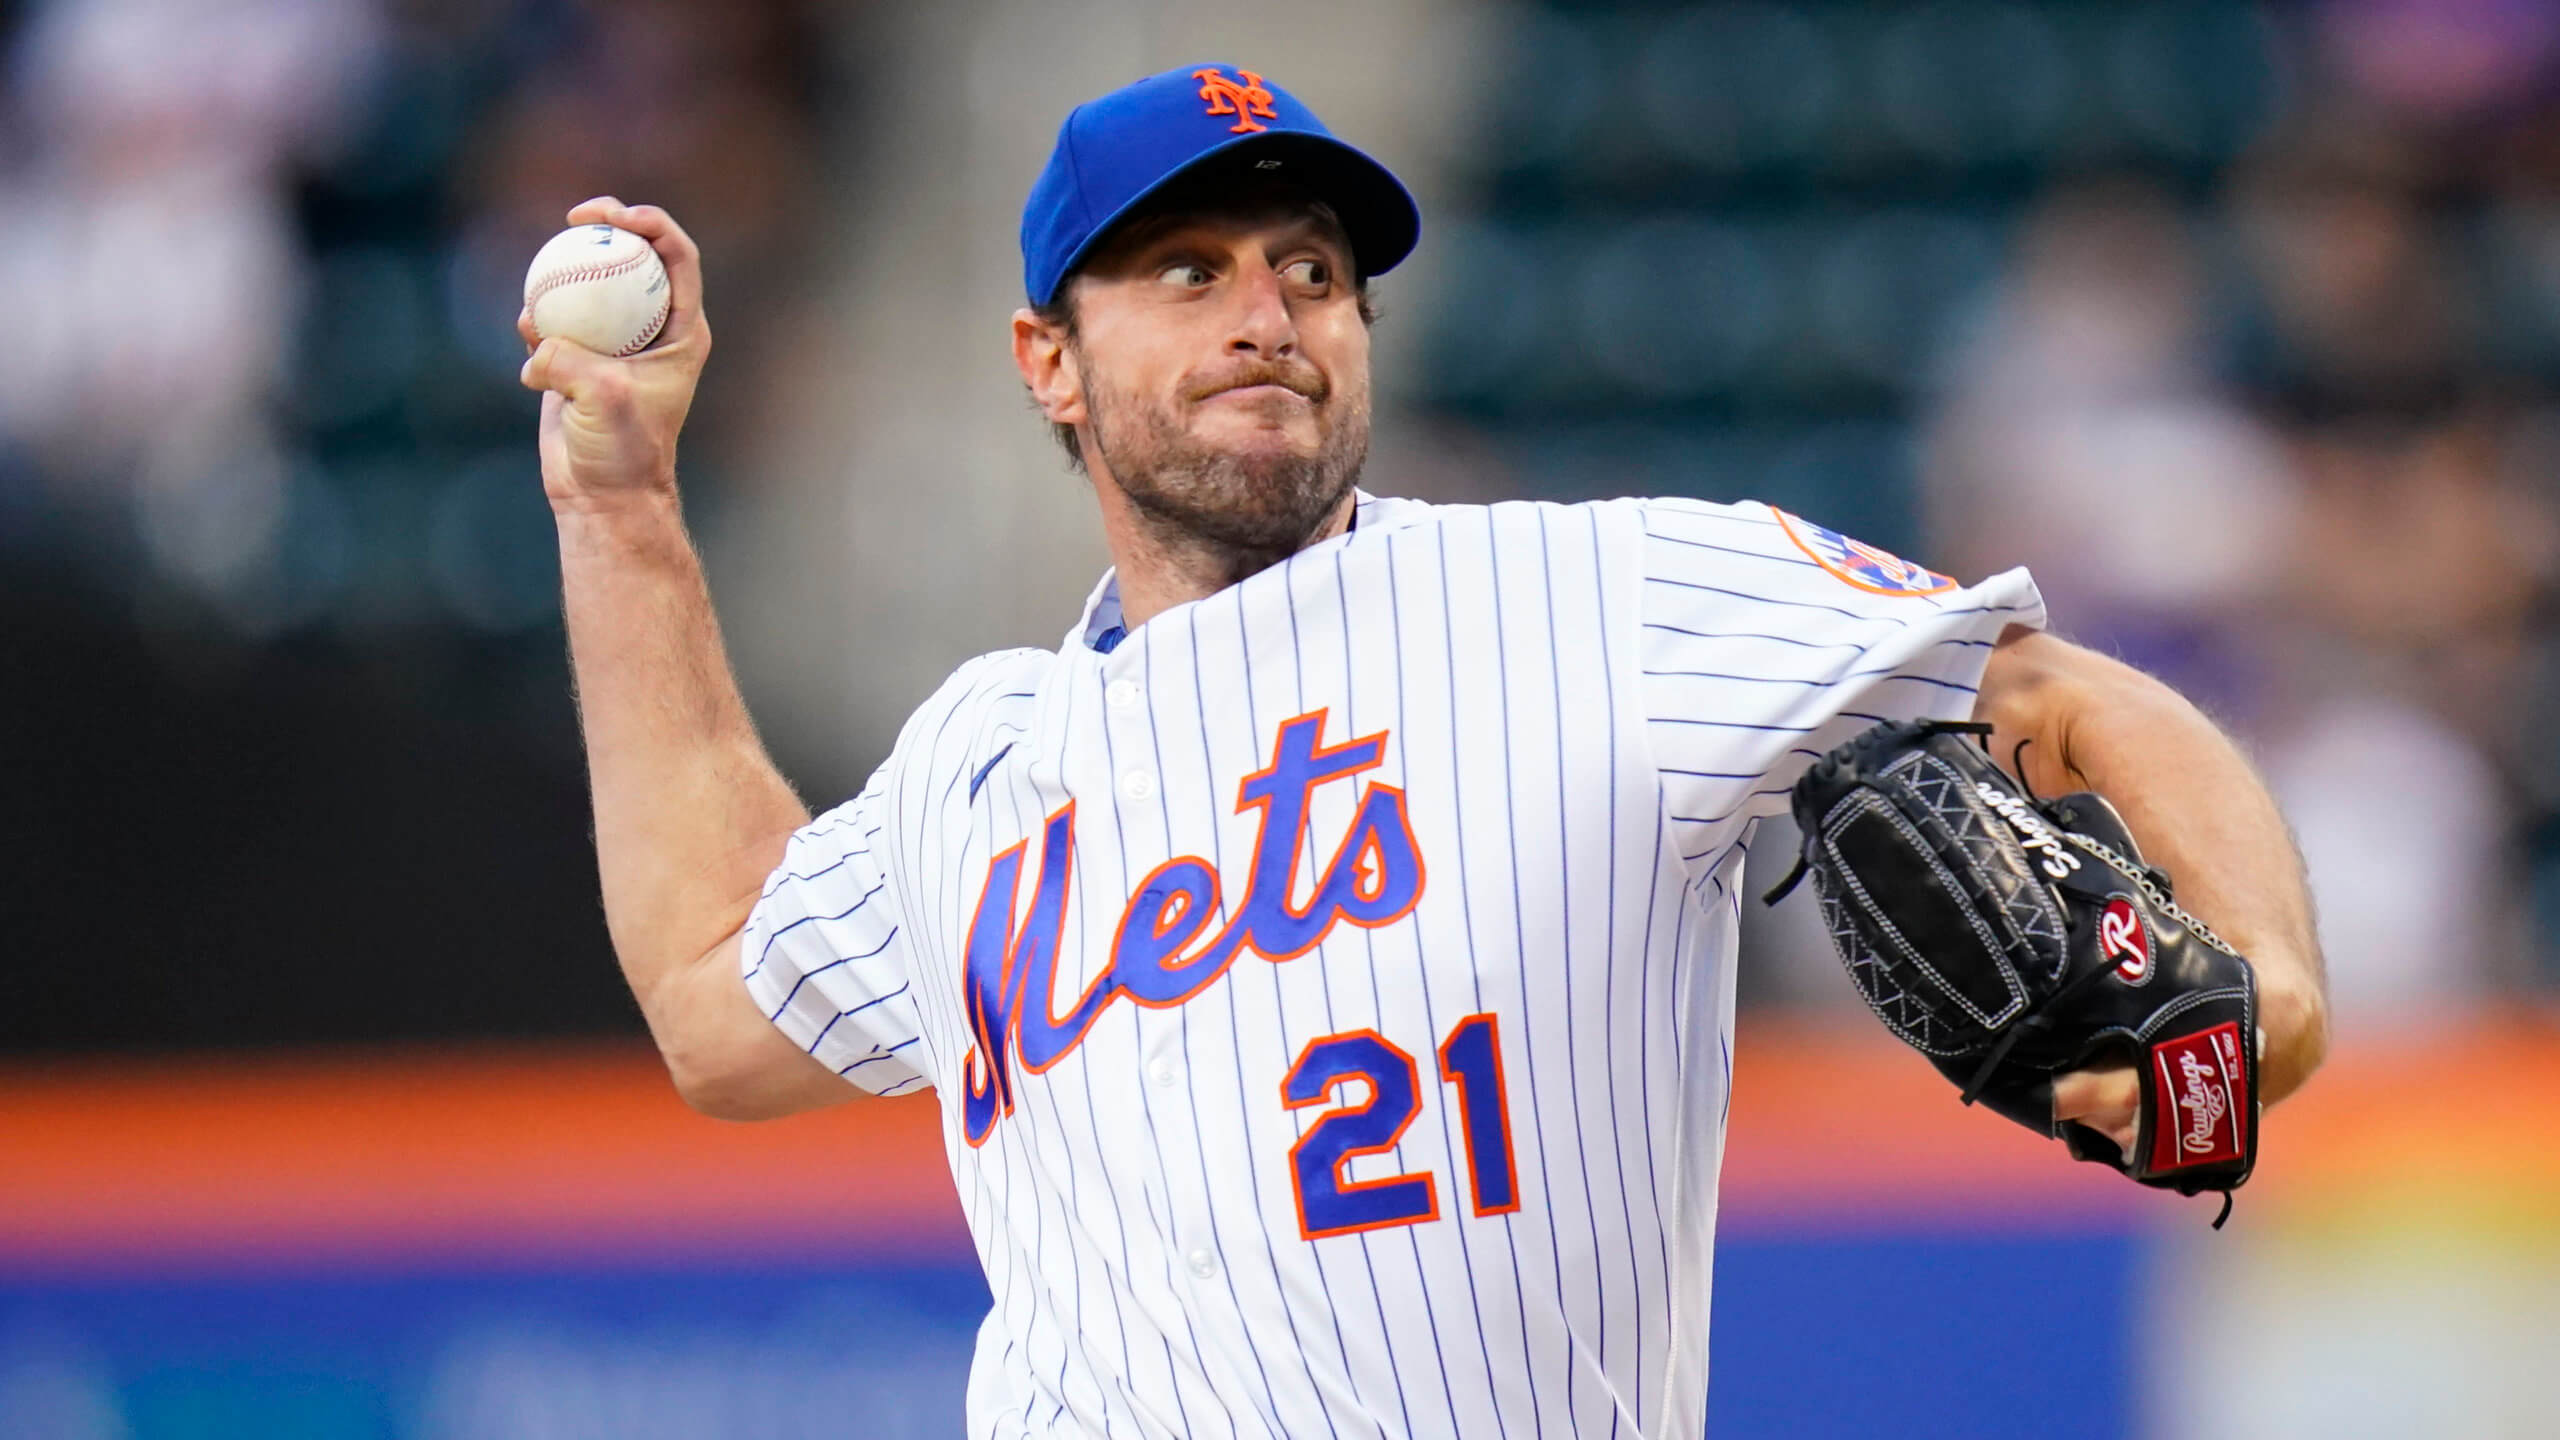 Mets ace Scherzer says he's fine, on track for next start